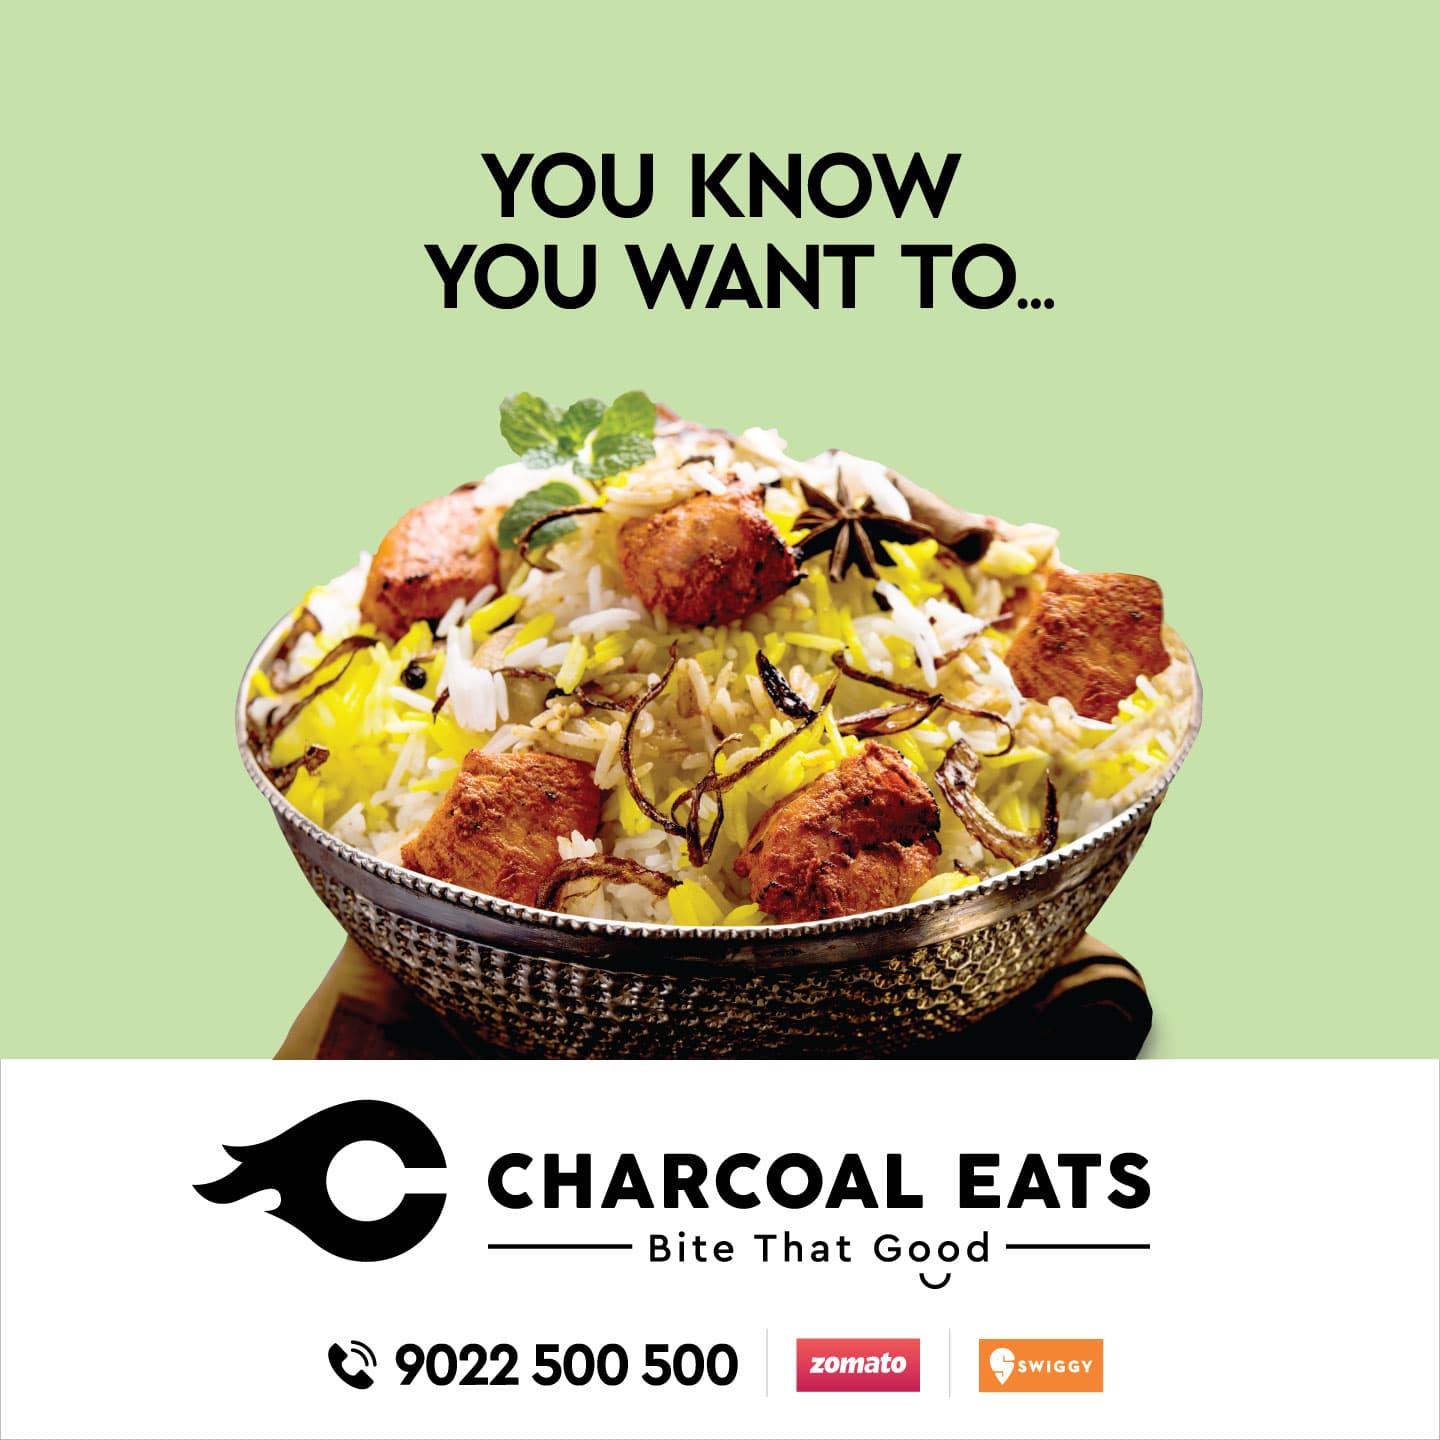 Charcoal Eats | You Know You Want To